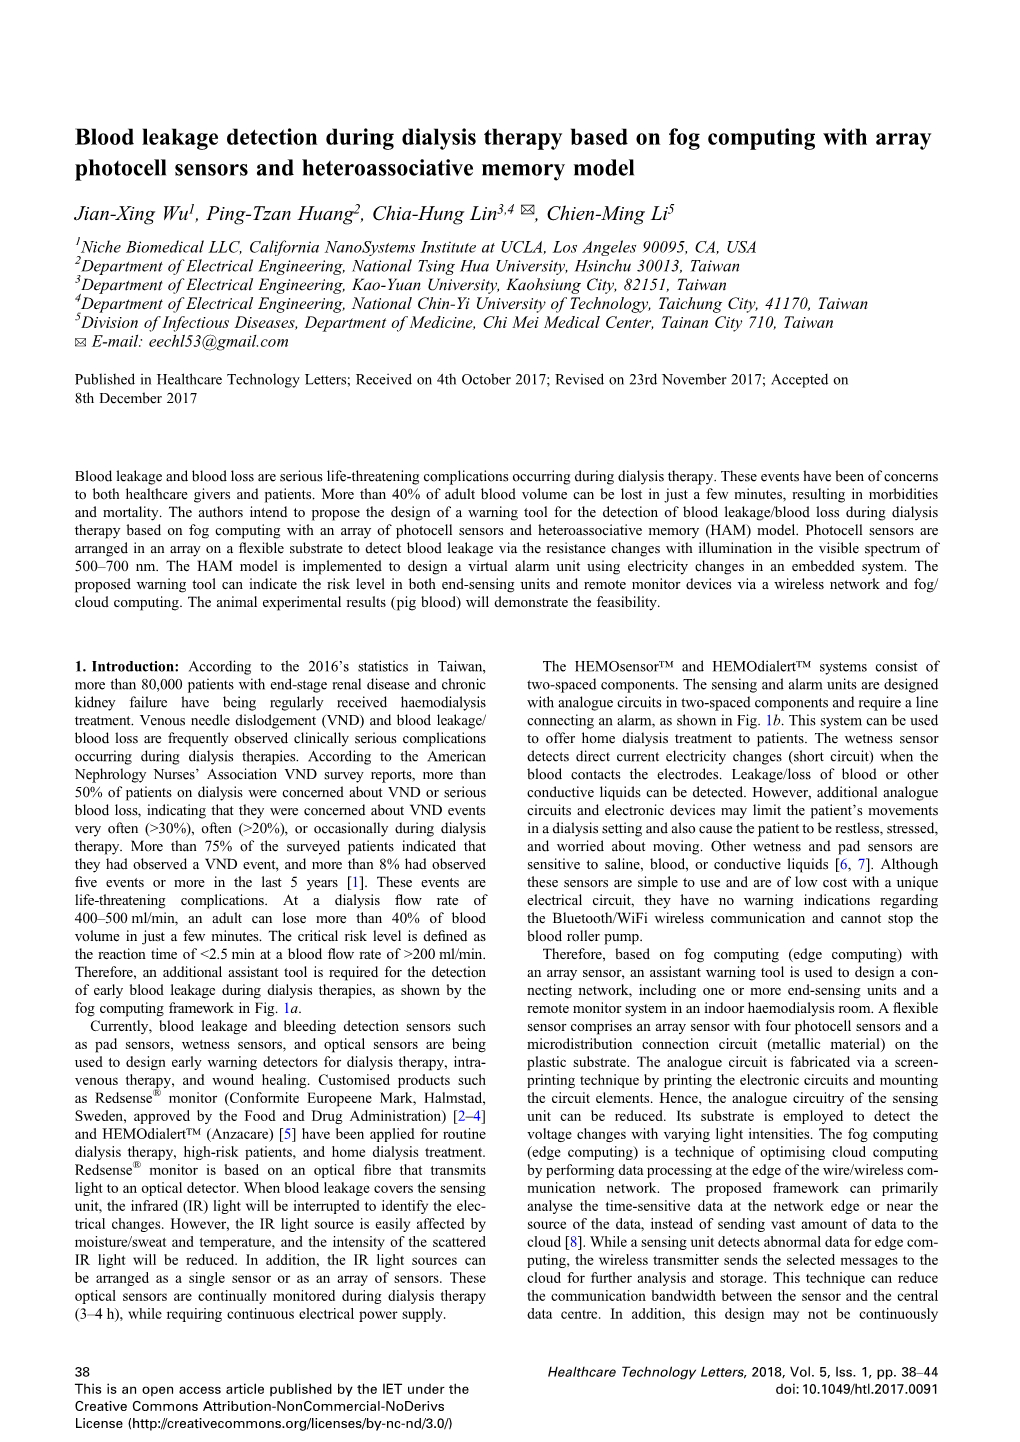 Blood Leakage Detection During Dialysis Therapy Based on Fog Computing with Array Photocell Sensors and Heteroassociative Memory Model